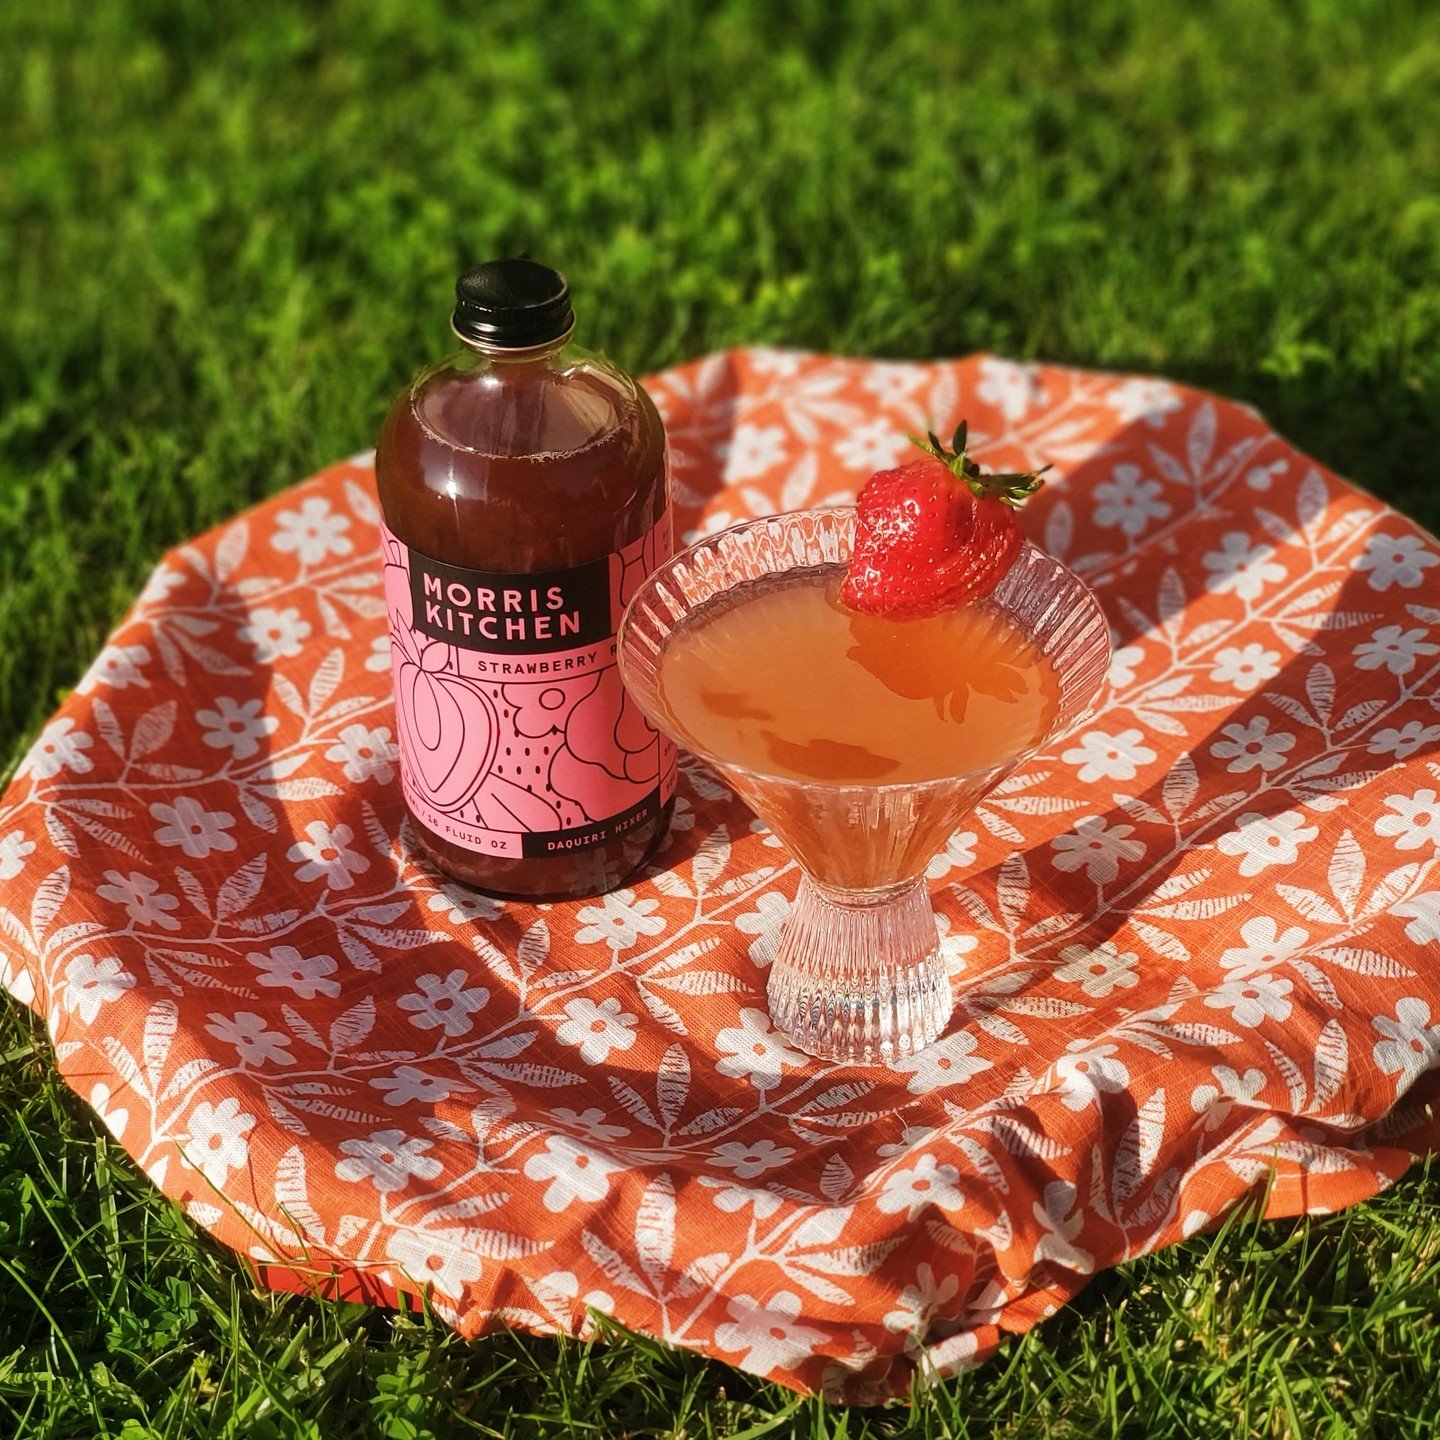 Welcoming in Mother's Day weekend with a nice &amp; simple recipe! Just 3 ingredients--gin, lemonade, and Strawberry Rose🍓🌞

1 oz Strawberry Rose Mixer
2 oz gin (we used Mojave Low Desert Dry Gin)
3 oz lemonade

Add all ingredients to a shaker with